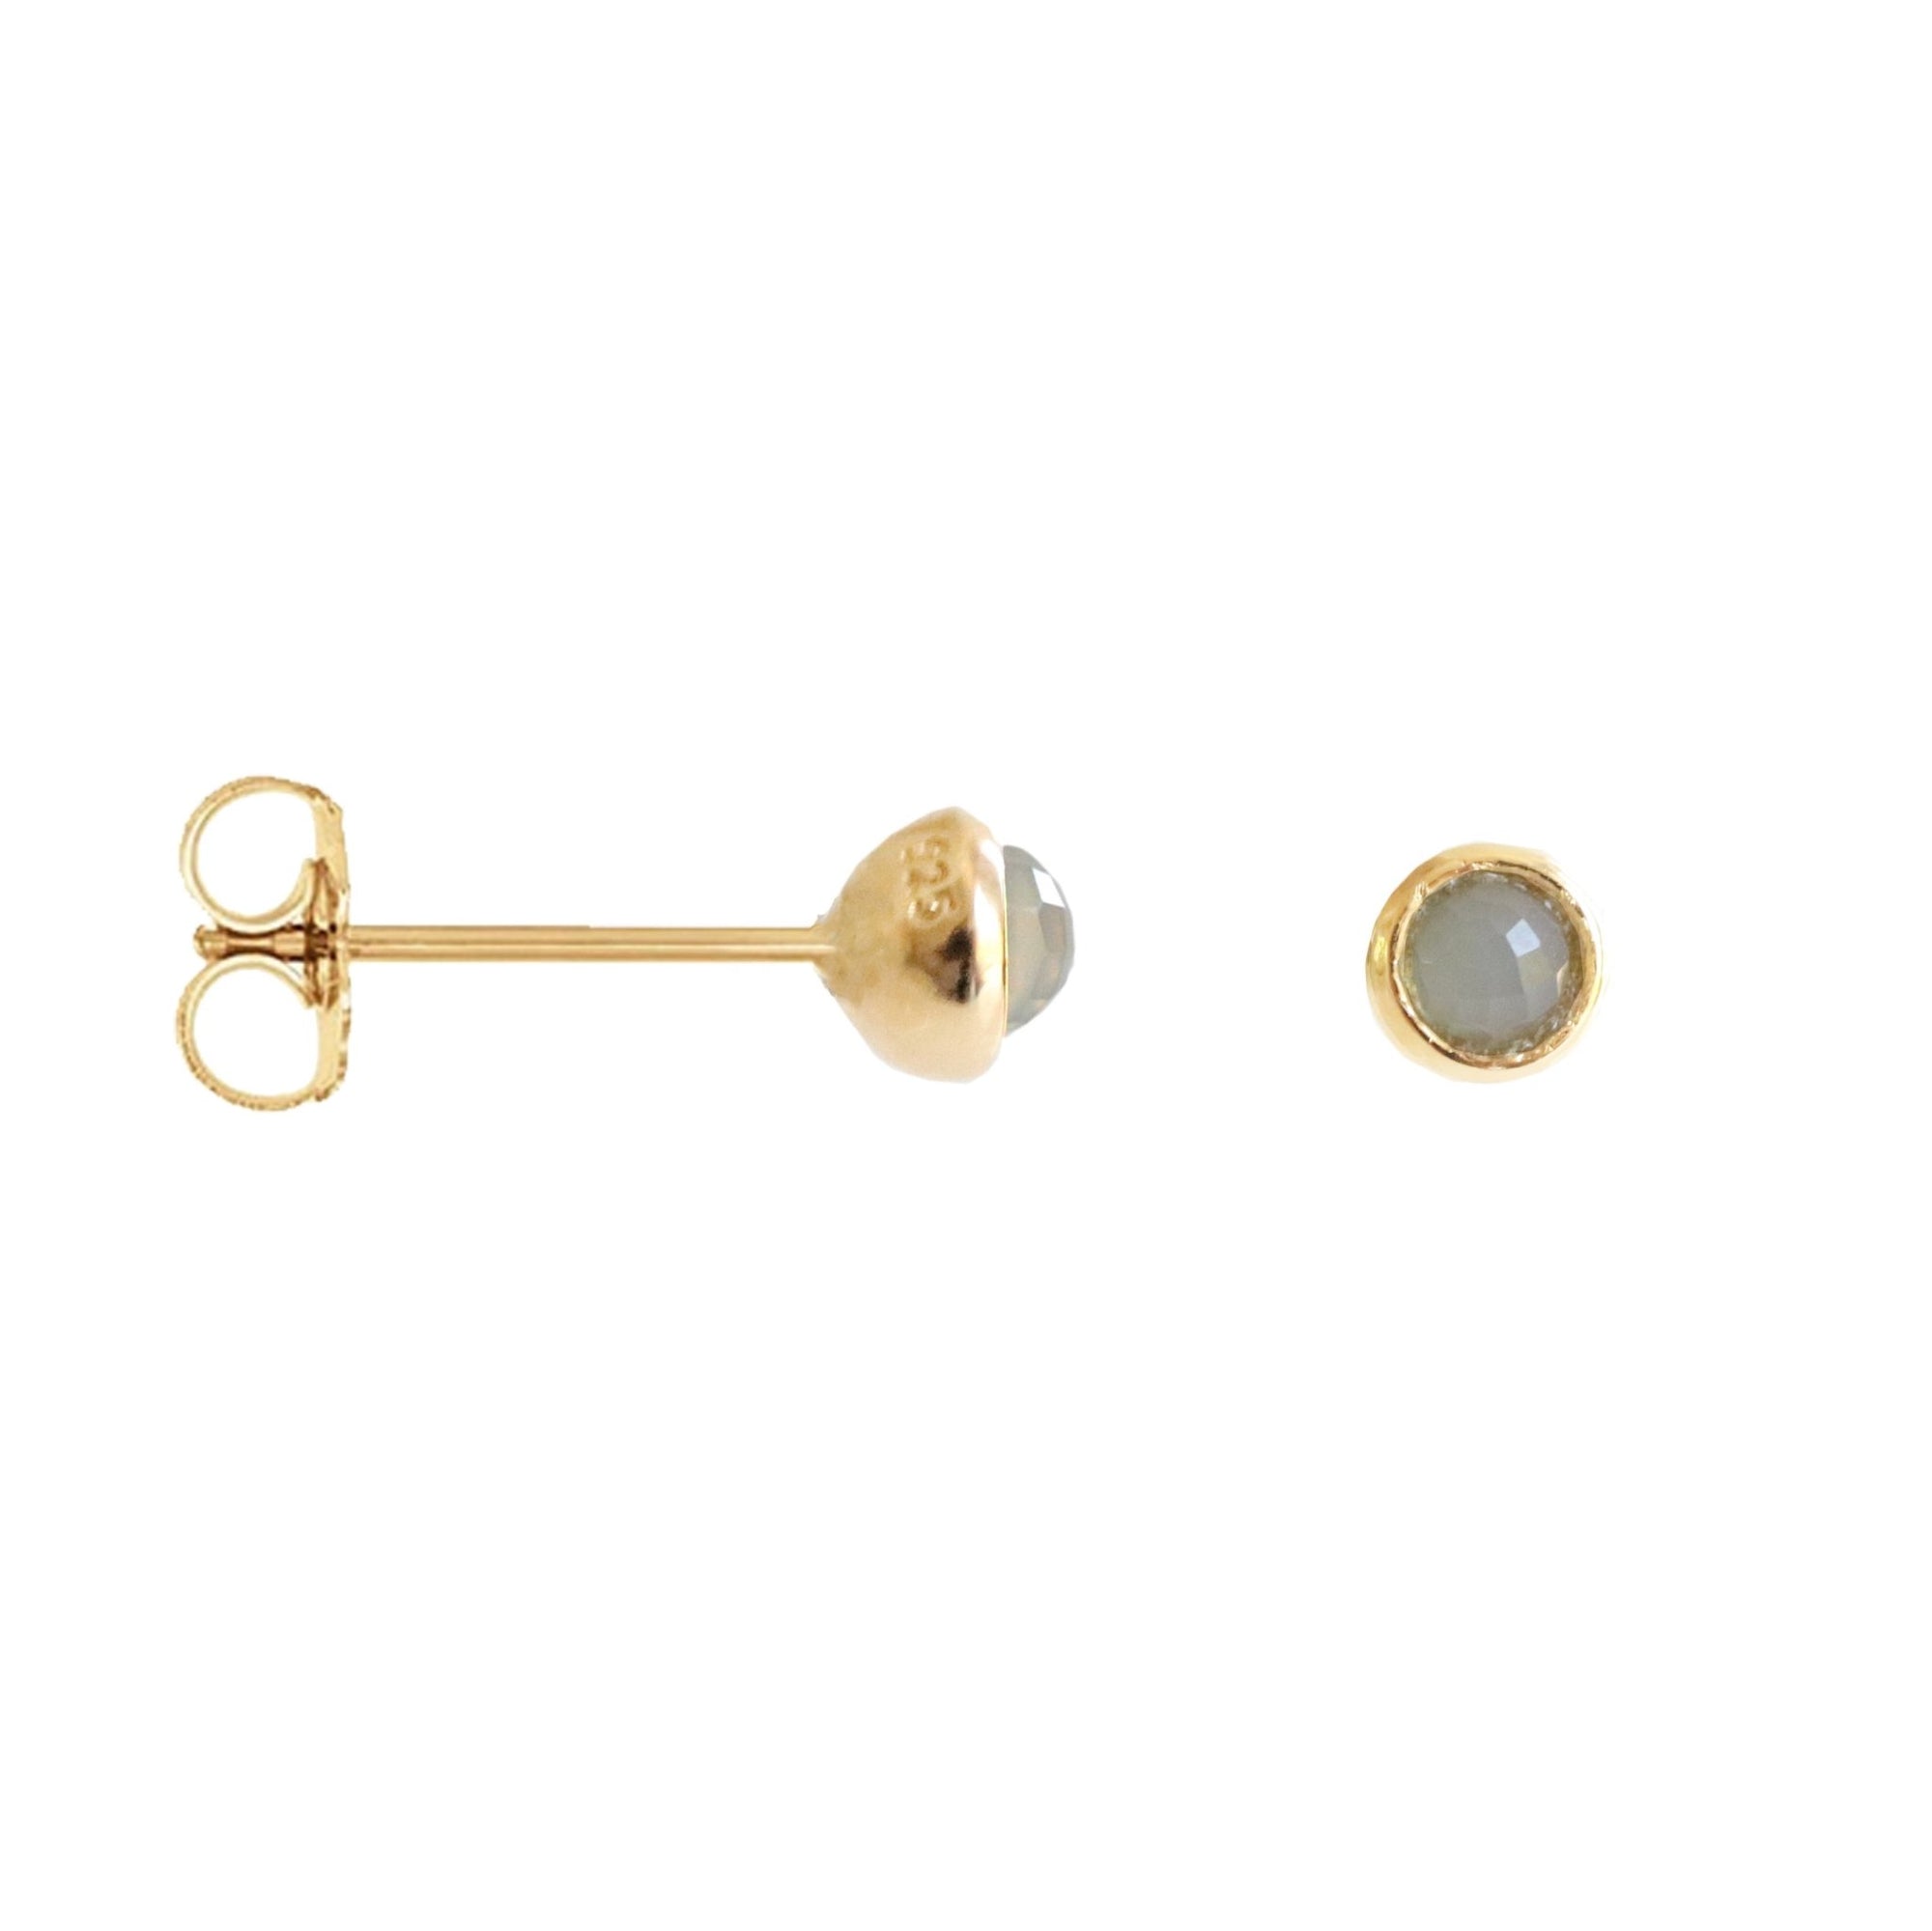 TINY PROTECT STUD EARRINGS - LABRADORITE & GOLD - SO PRETTY CARA COTTER